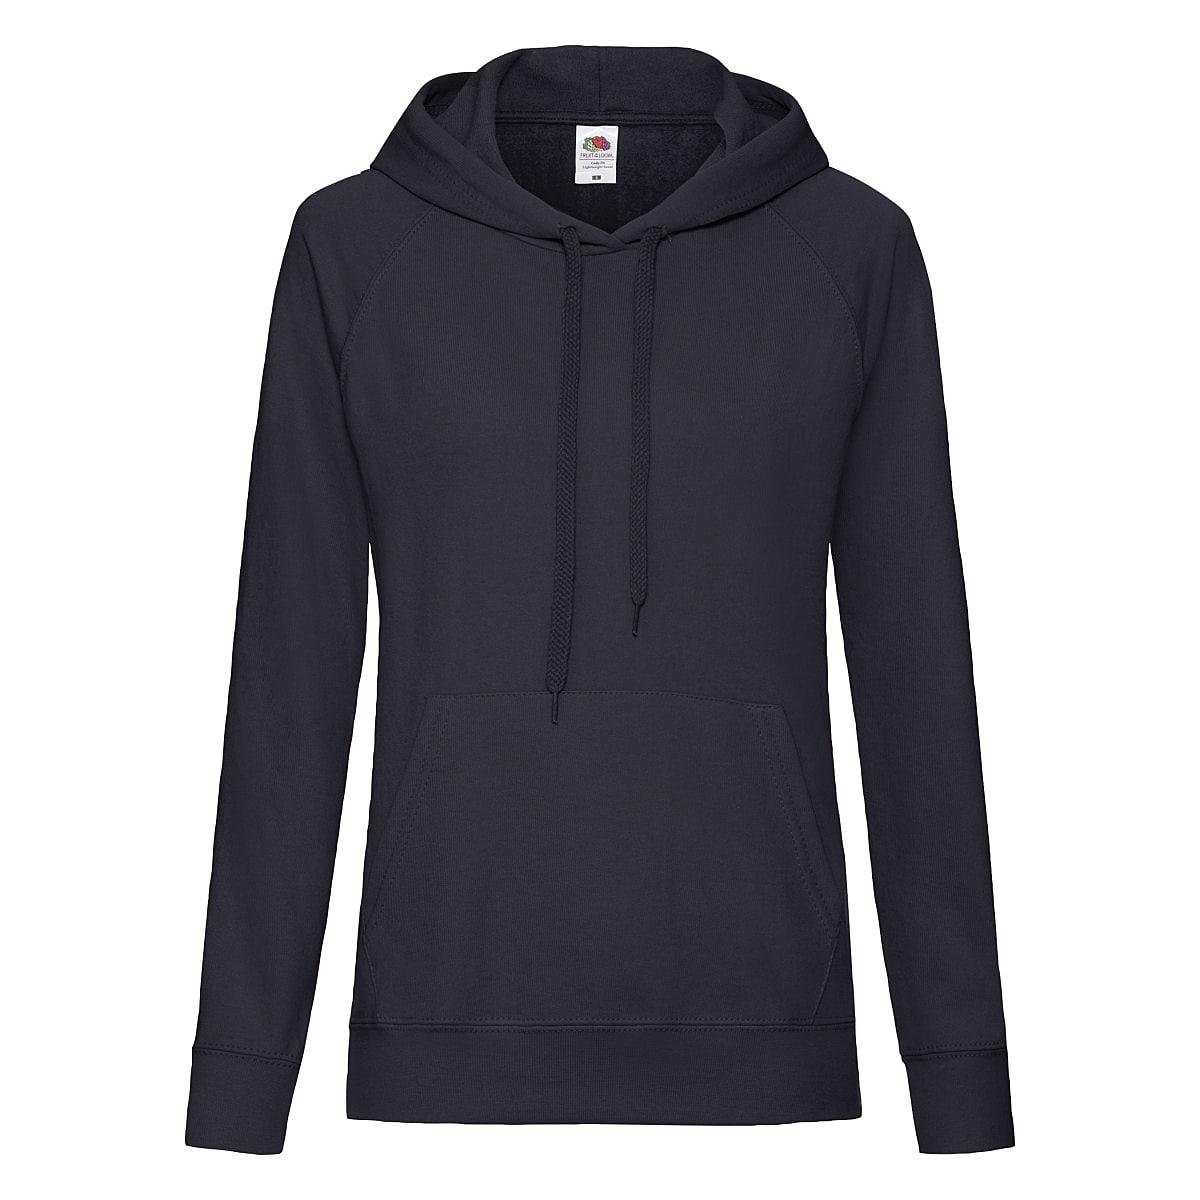 Fruit Of The Loom Lady-Fit Lightweight Hoodie in Deep Navy (Product Code: 62148)